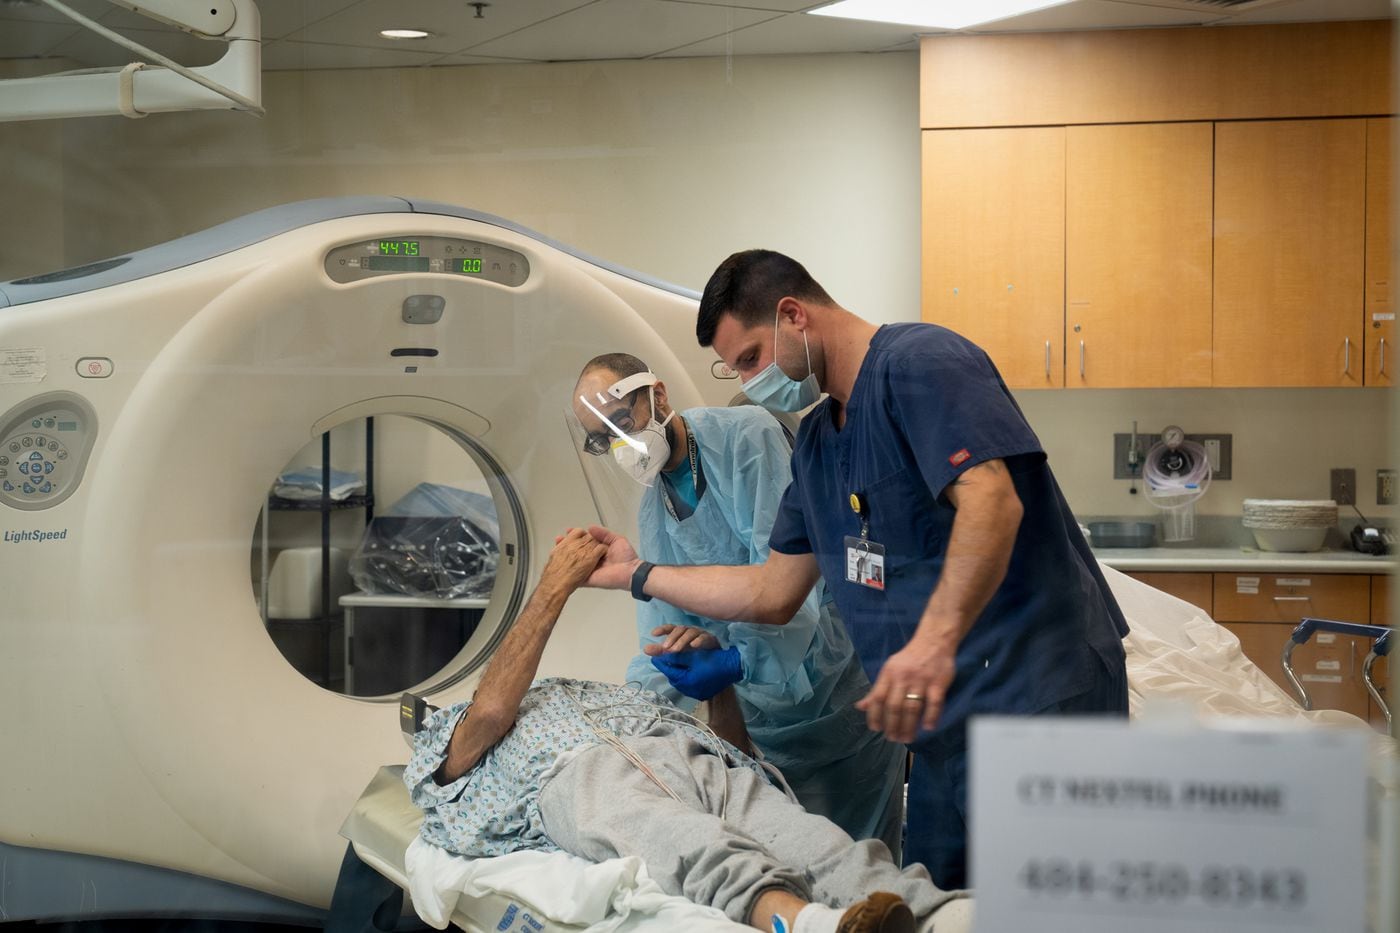 CT technologist Simon Jeffries (back, center) and ER nurse Len Babula (front) perform a CT scan on a COVID-19 patient at Suburban Community Hospital in mid-January. The patient is being treated for a persistent cough.